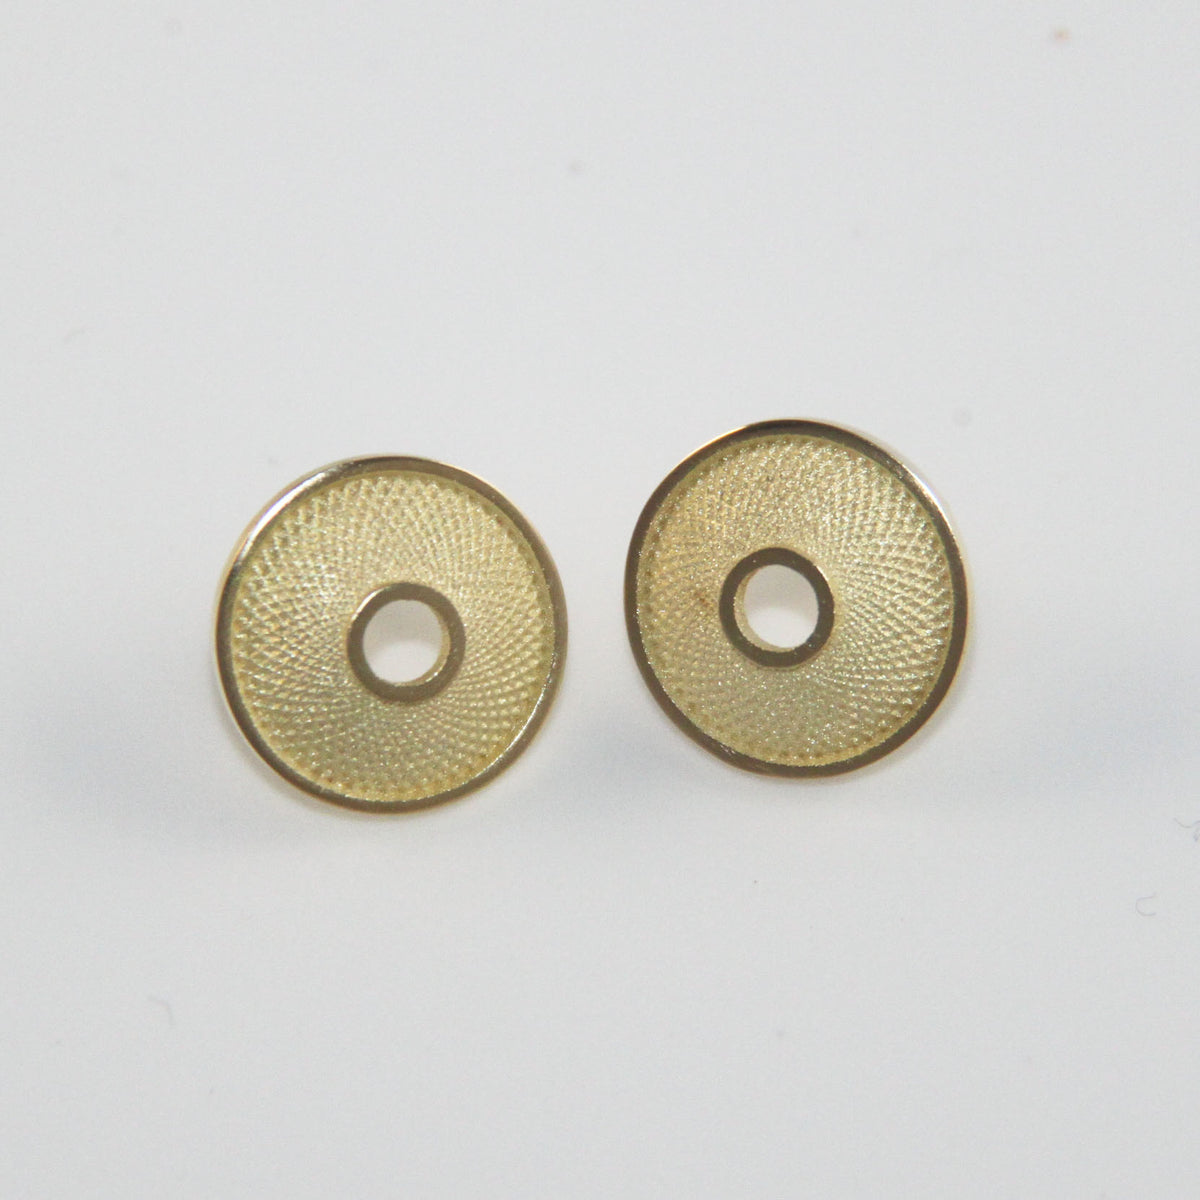 Yellow gold 18ct with fine texture surface - Earrings - Alice Whish